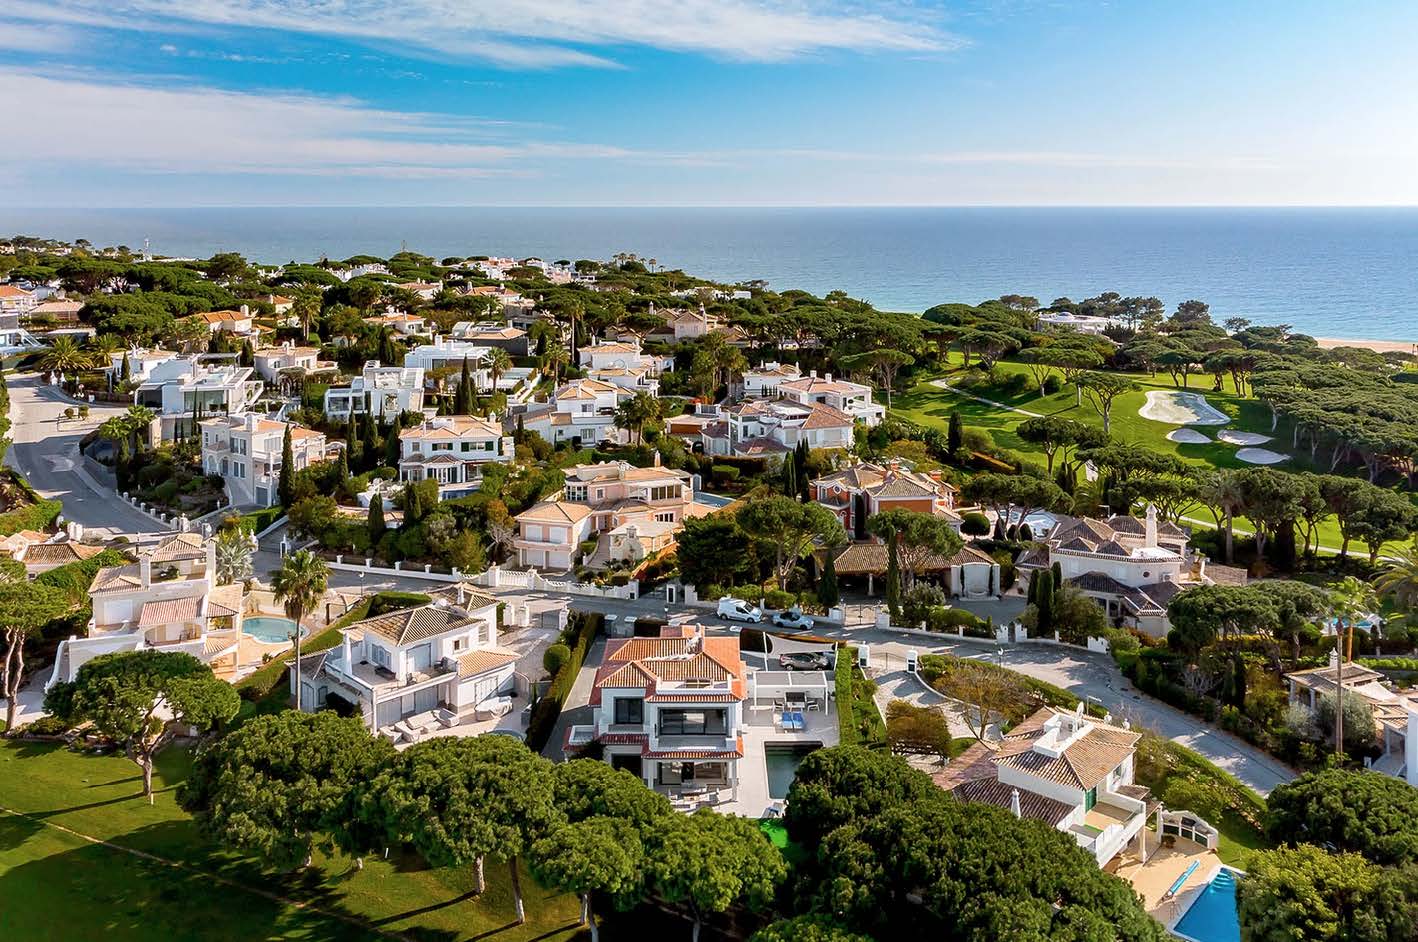 Why Vale do Lobo is The Perfect Vacation to End the Summer Season